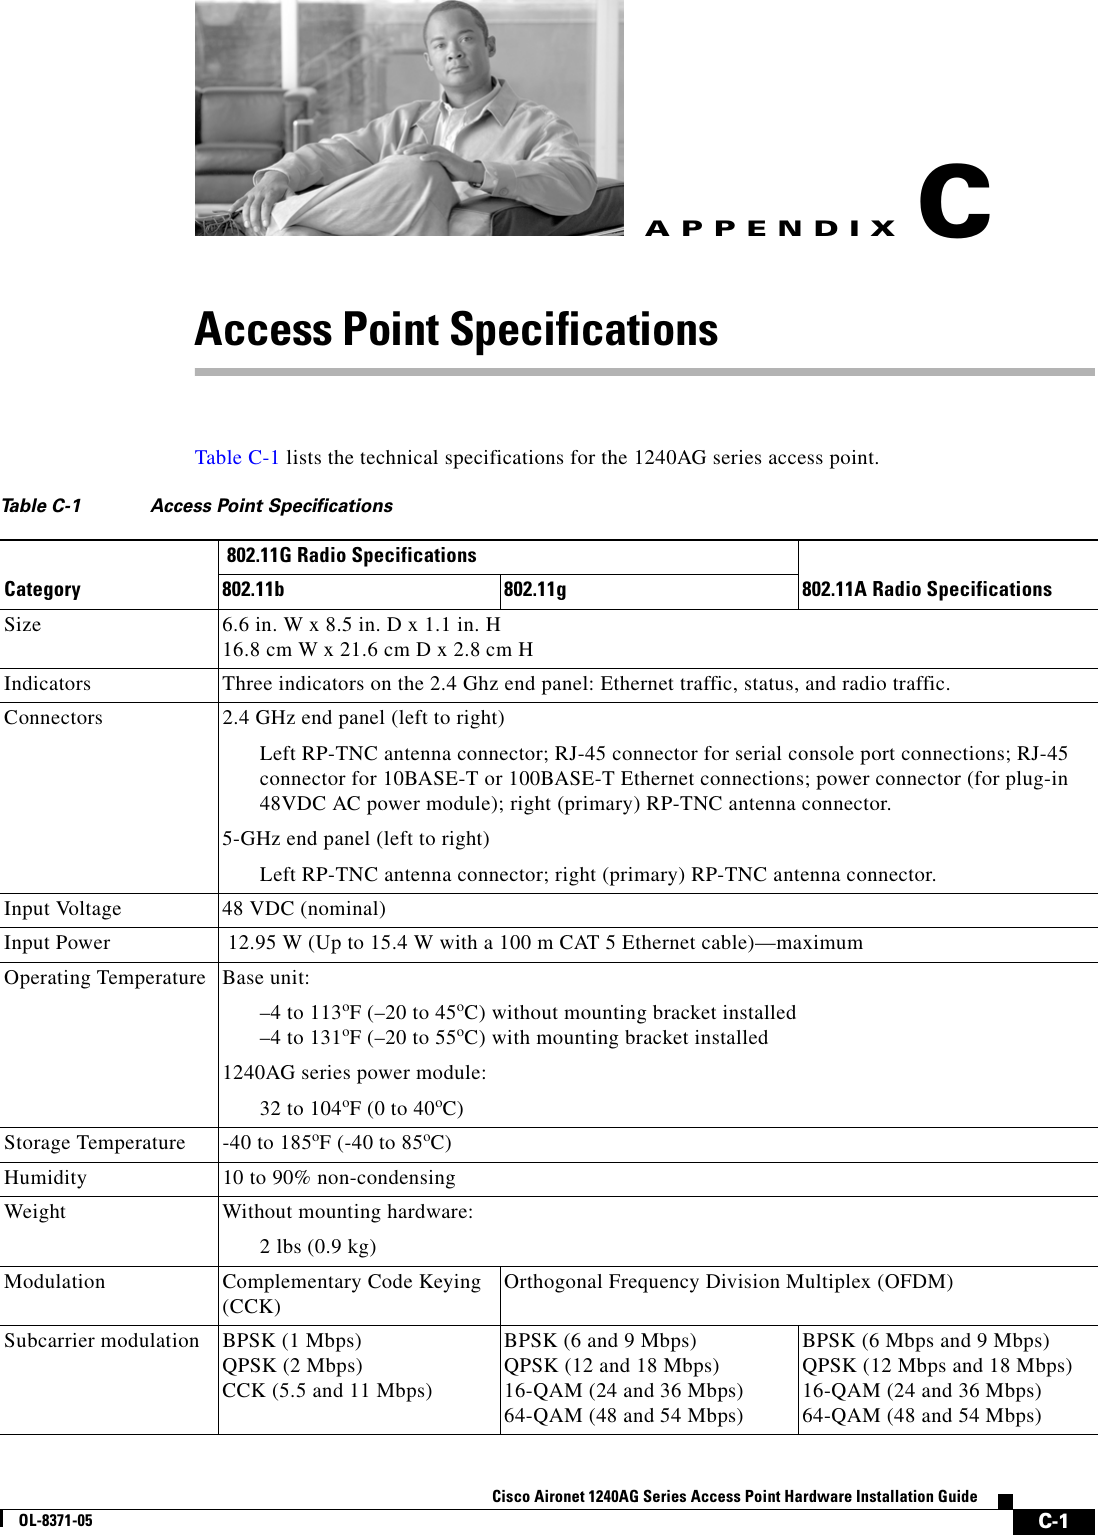  C-1Cisco Aironet 1240AG Series Access Point Hardware Installation GuideOL-8371-05APPENDIXCAccess Point Specifications Table C-1 lists the technical specifications for the 1240AG series access point.  Table C-1 Access Point SpecificationsCategory 802.11G Radio Specifications802.11A Radio Specifications802.11b 802.11gSize 6.6 in. W x 8.5 in. D x 1.1 in. H 16.8 cm W x 21.6 cm D x 2.8 cm H Indicators Three indicators on the 2.4 Ghz end panel: Ethernet traffic, status, and radio traffic.Connectors 2.4 GHz end panel (left to right)Left RP-TNC antenna connector; RJ-45 connector for serial console port connections; RJ-45 connector for 10BASE-T or 100BASE-T Ethernet connections; power connector (for plug-in 48VDC AC power module); right (primary) RP-TNC antenna connector.5-GHz end panel (left to right)Left RP-TNC antenna connector; right (primary) RP-TNC antenna connector.Input Voltage  48 VDC (nominal)Input Power  12.95 W (Up to 15.4 W with a 100 m CAT 5 Ethernet cable)—maximumOperating Temperature Base unit:–4 to 113oF (–20 to 45oC) without mounting bracket installed–4 to 131oF (–20 to 55oC) with mounting bracket installed1240AG series power module:32 to 104oF (0 to 40oC)Storage Temperature -40 to 185oF (-40 to 85oC)Humidity 10 to 90% non-condensingWeight Without mounting hardware:2 lbs (0.9 kg) Modulation Complementary Code Keying (CCK) Orthogonal Frequency Division Multiplex (OFDM)Subcarrier modulation BPSK (1 Mbps)QPSK (2 Mbps)CCK (5.5 and 11 Mbps)BPSK (6 and 9 Mbps)QPSK (12 and 18 Mbps)16-QAM (24 and 36 Mbps)64-QAM (48 and 54 Mbps)BPSK (6 Mbps and 9 Mbps)QPSK (12 Mbps and 18 Mbps)16-QAM (24 and 36 Mbps)64-QAM (48 and 54 Mbps)